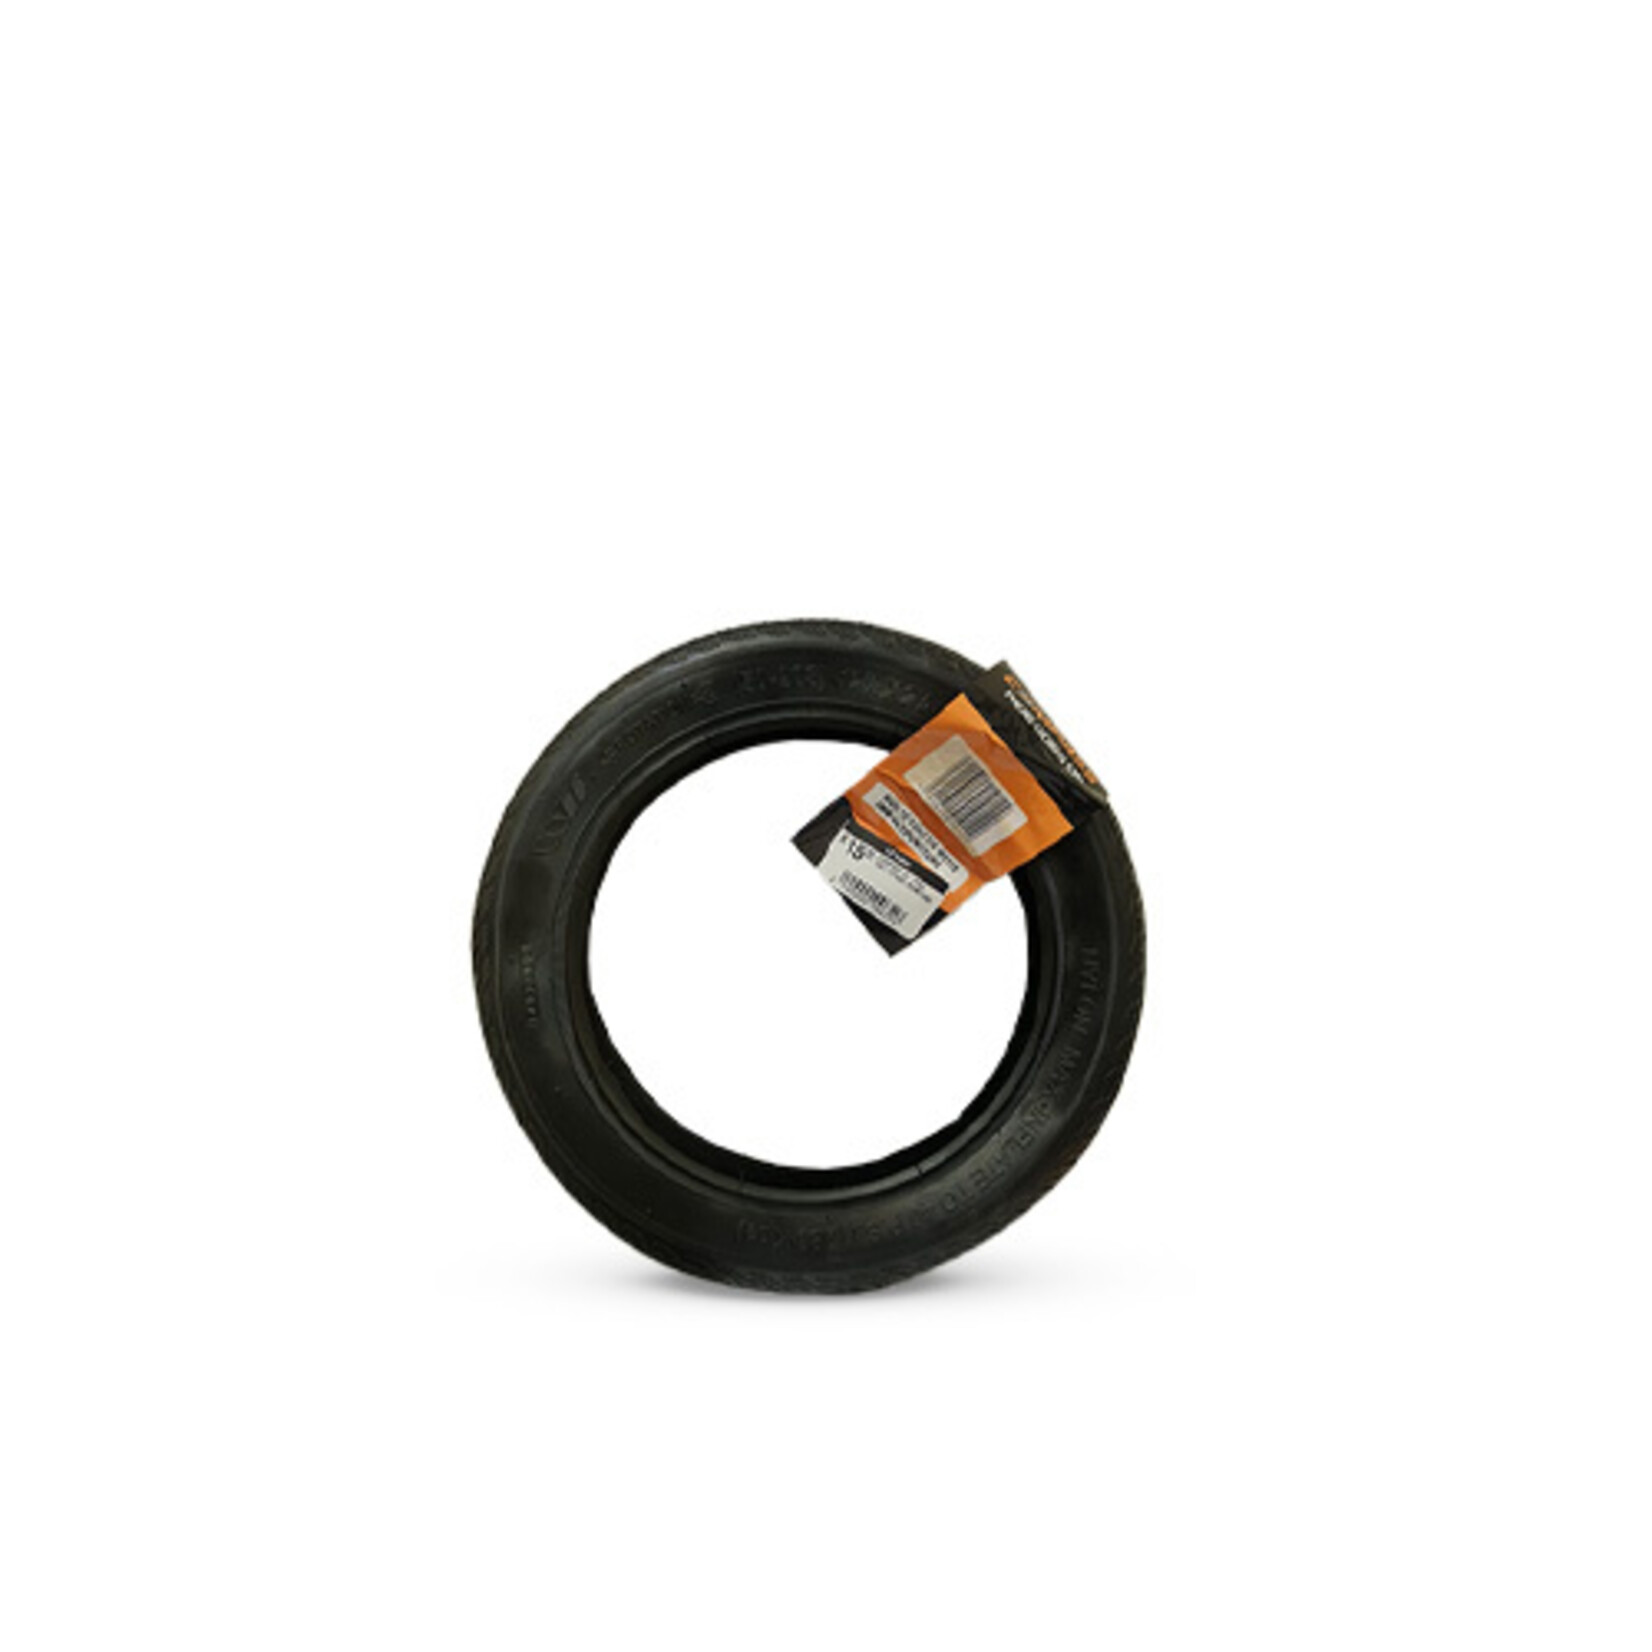 COMPASS COMPASS 12'' TYRE 12X1.75 ANTI PUNCTURE